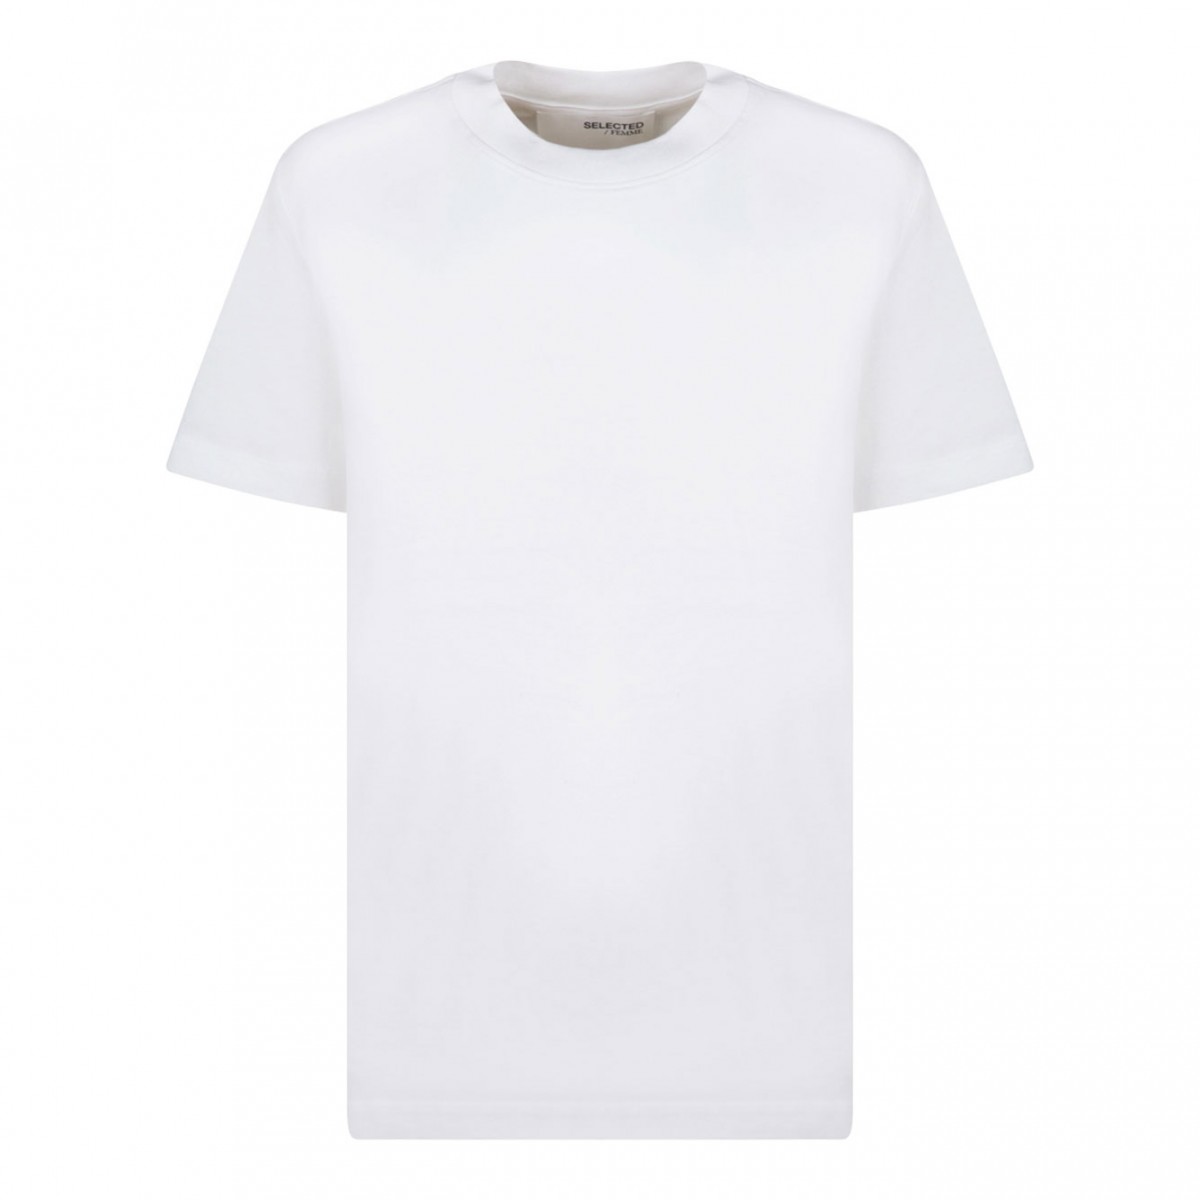 Slightly Dropped Shoulders White T-Shirt